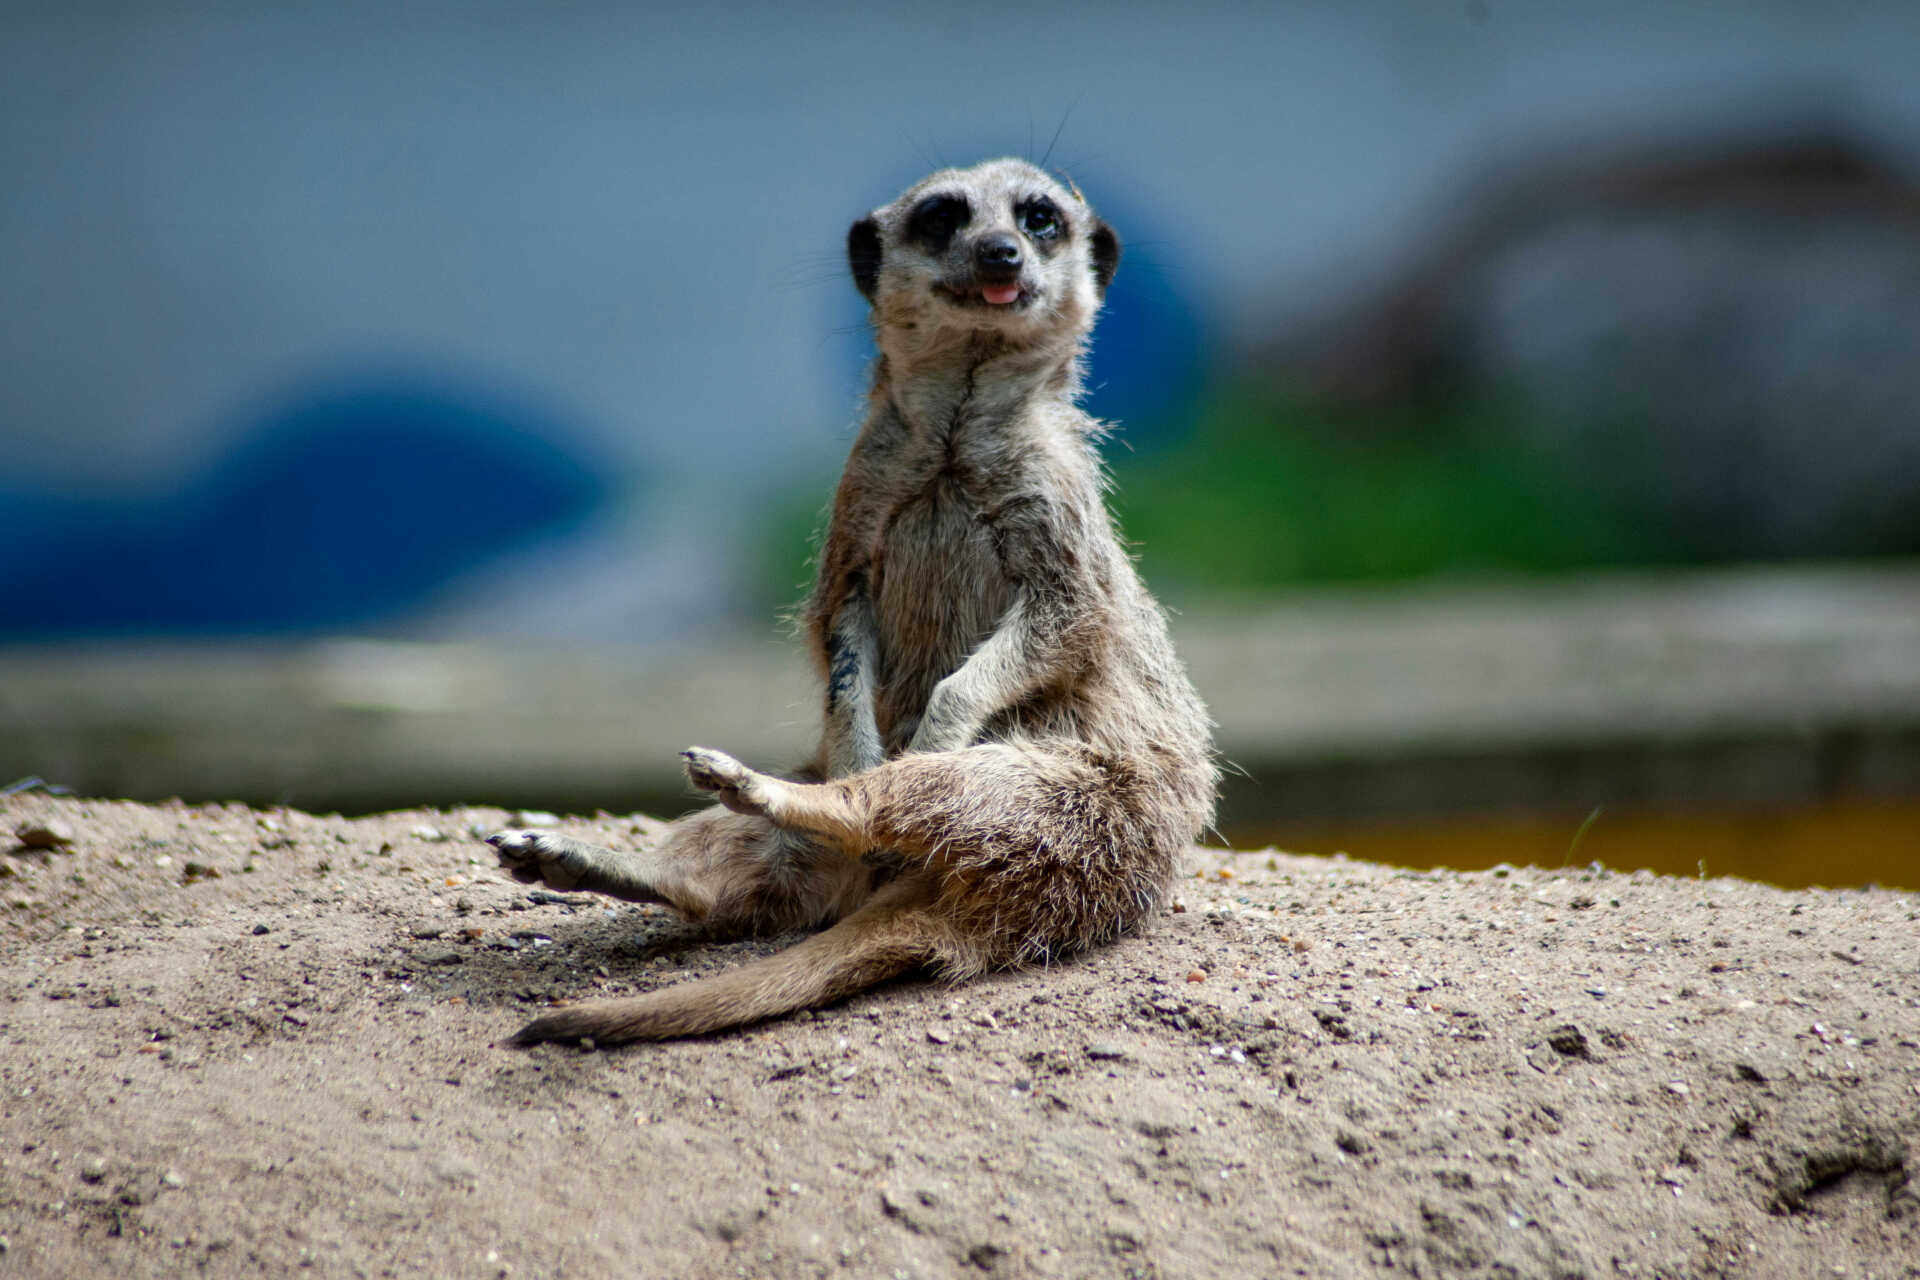 Meerkat looking forward to some human visitors at Middle England Farm